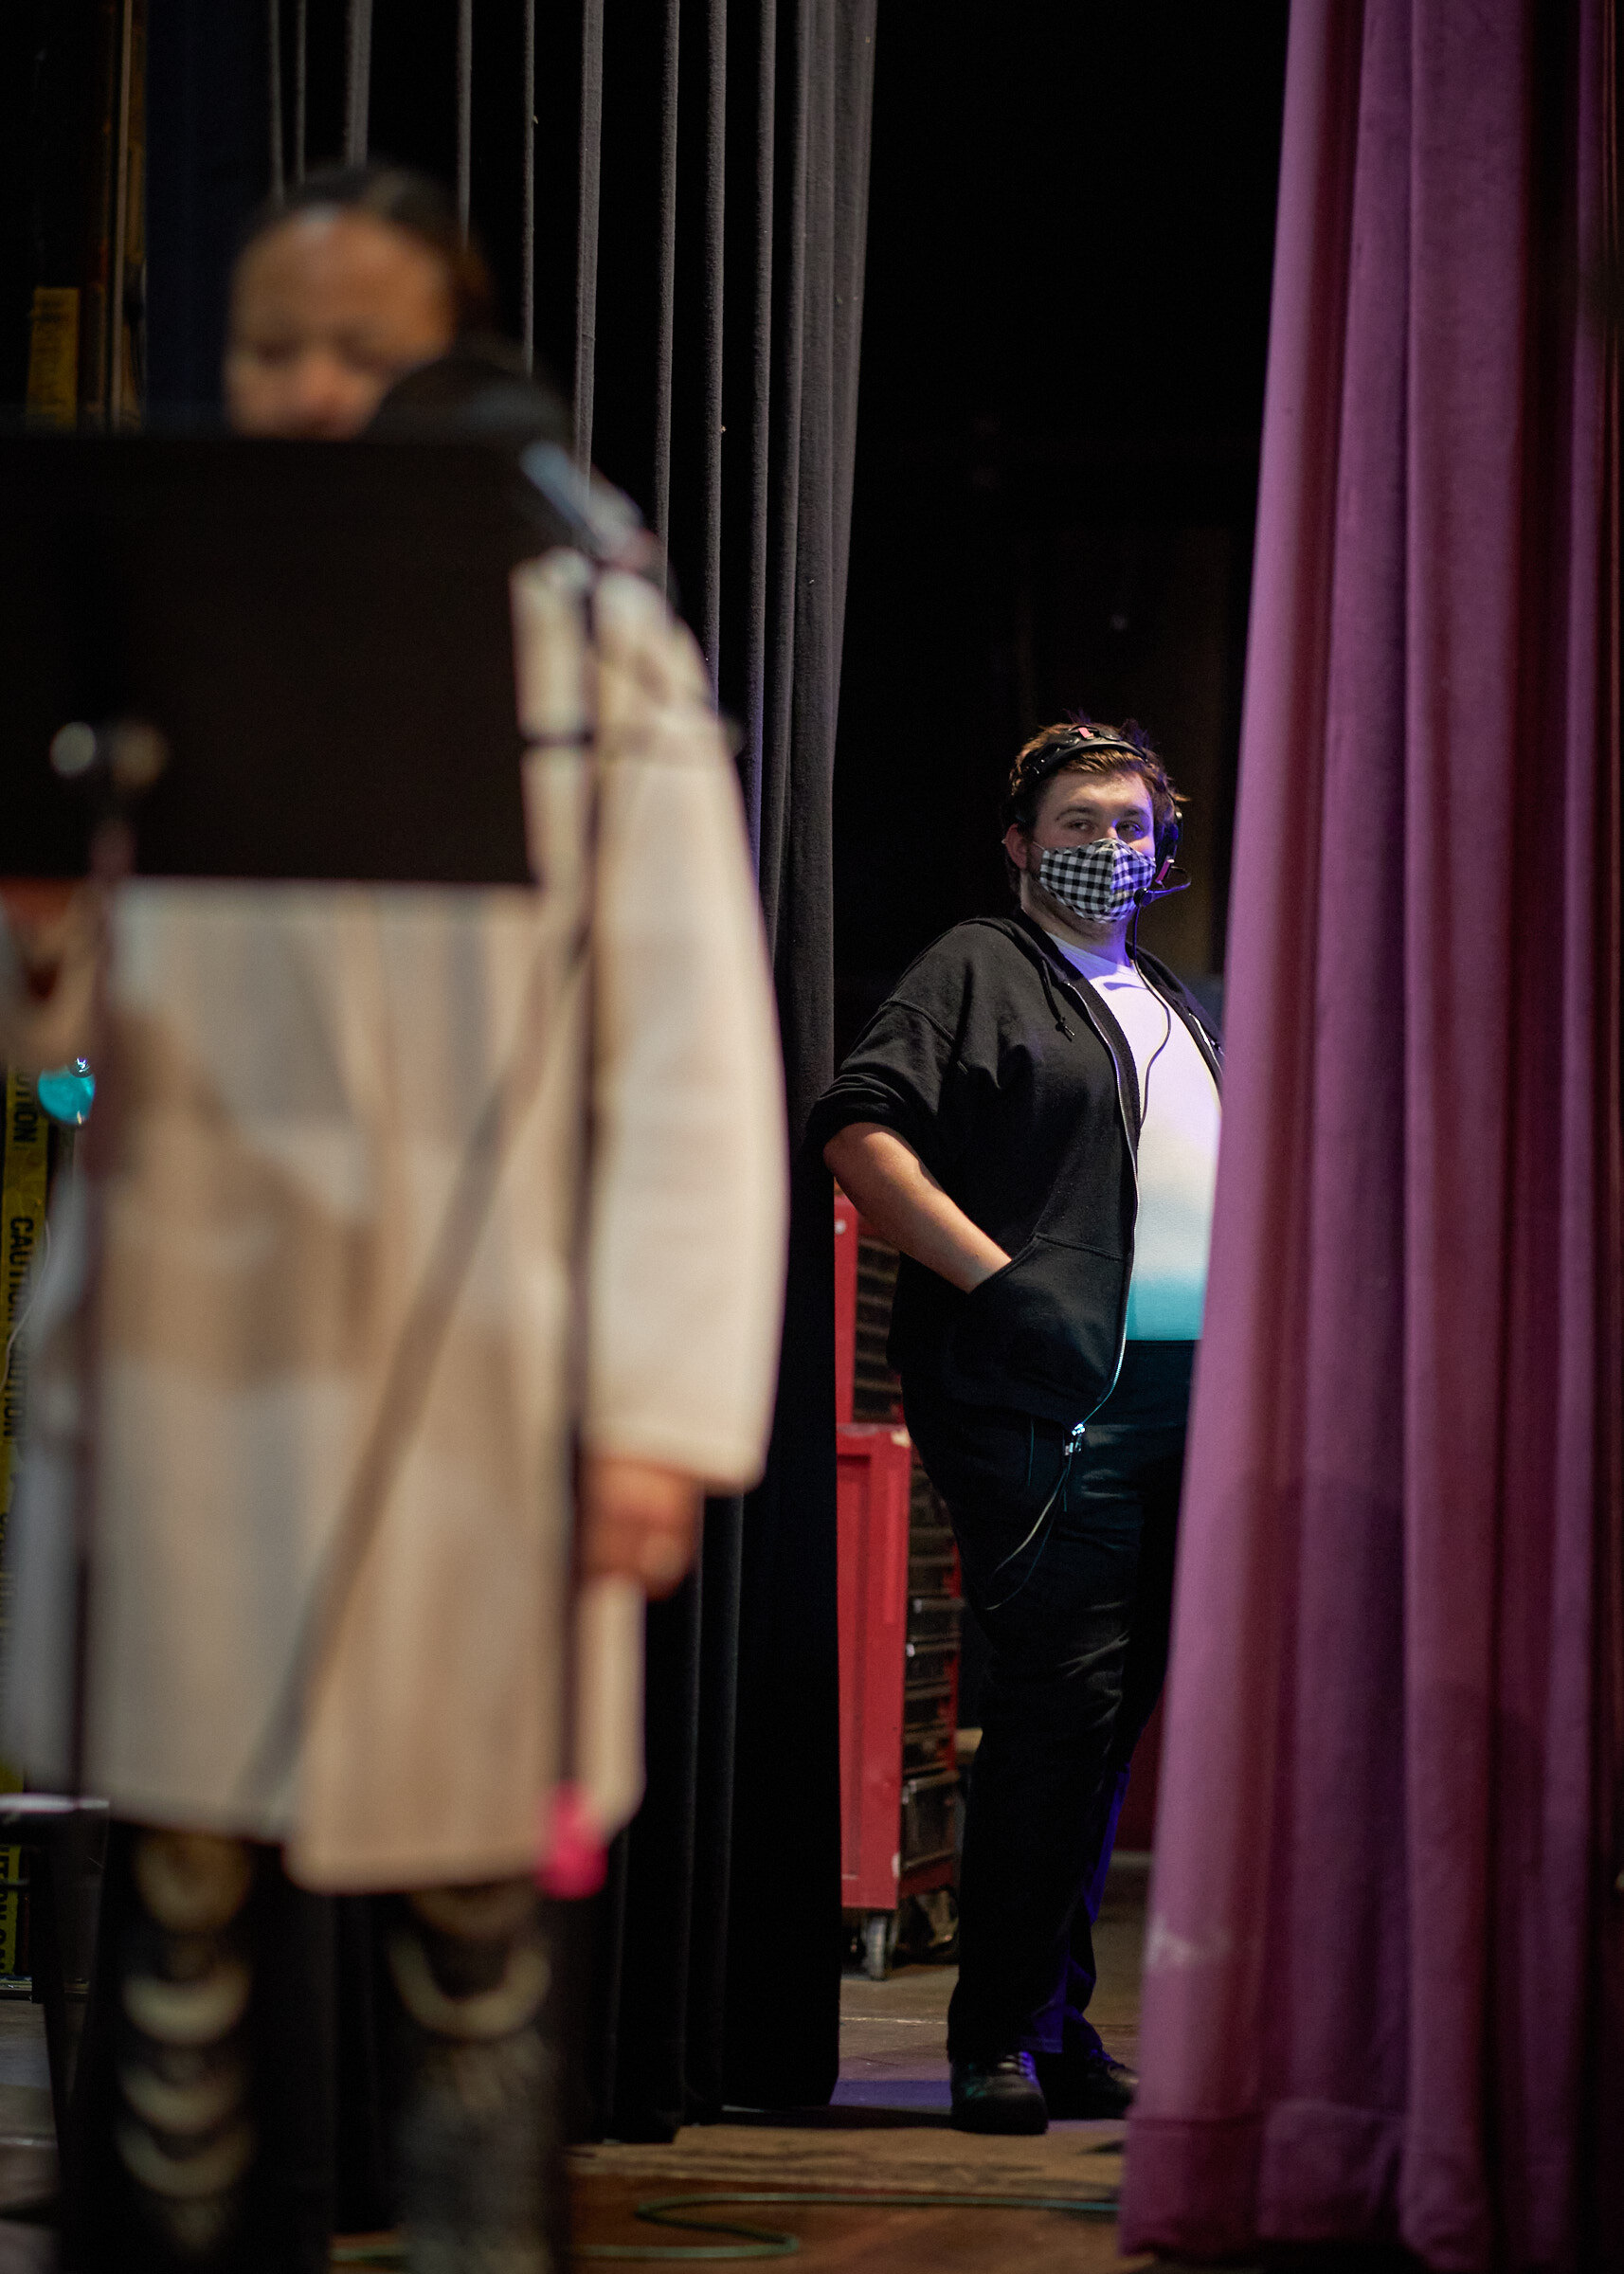  Final Mission is performed live at the Little Theatre of Alexandria on October 20 and 22 for the Between Acts podcast. Between Acts is owned by Missing Link. [Image ©Matthew Rakola.] 